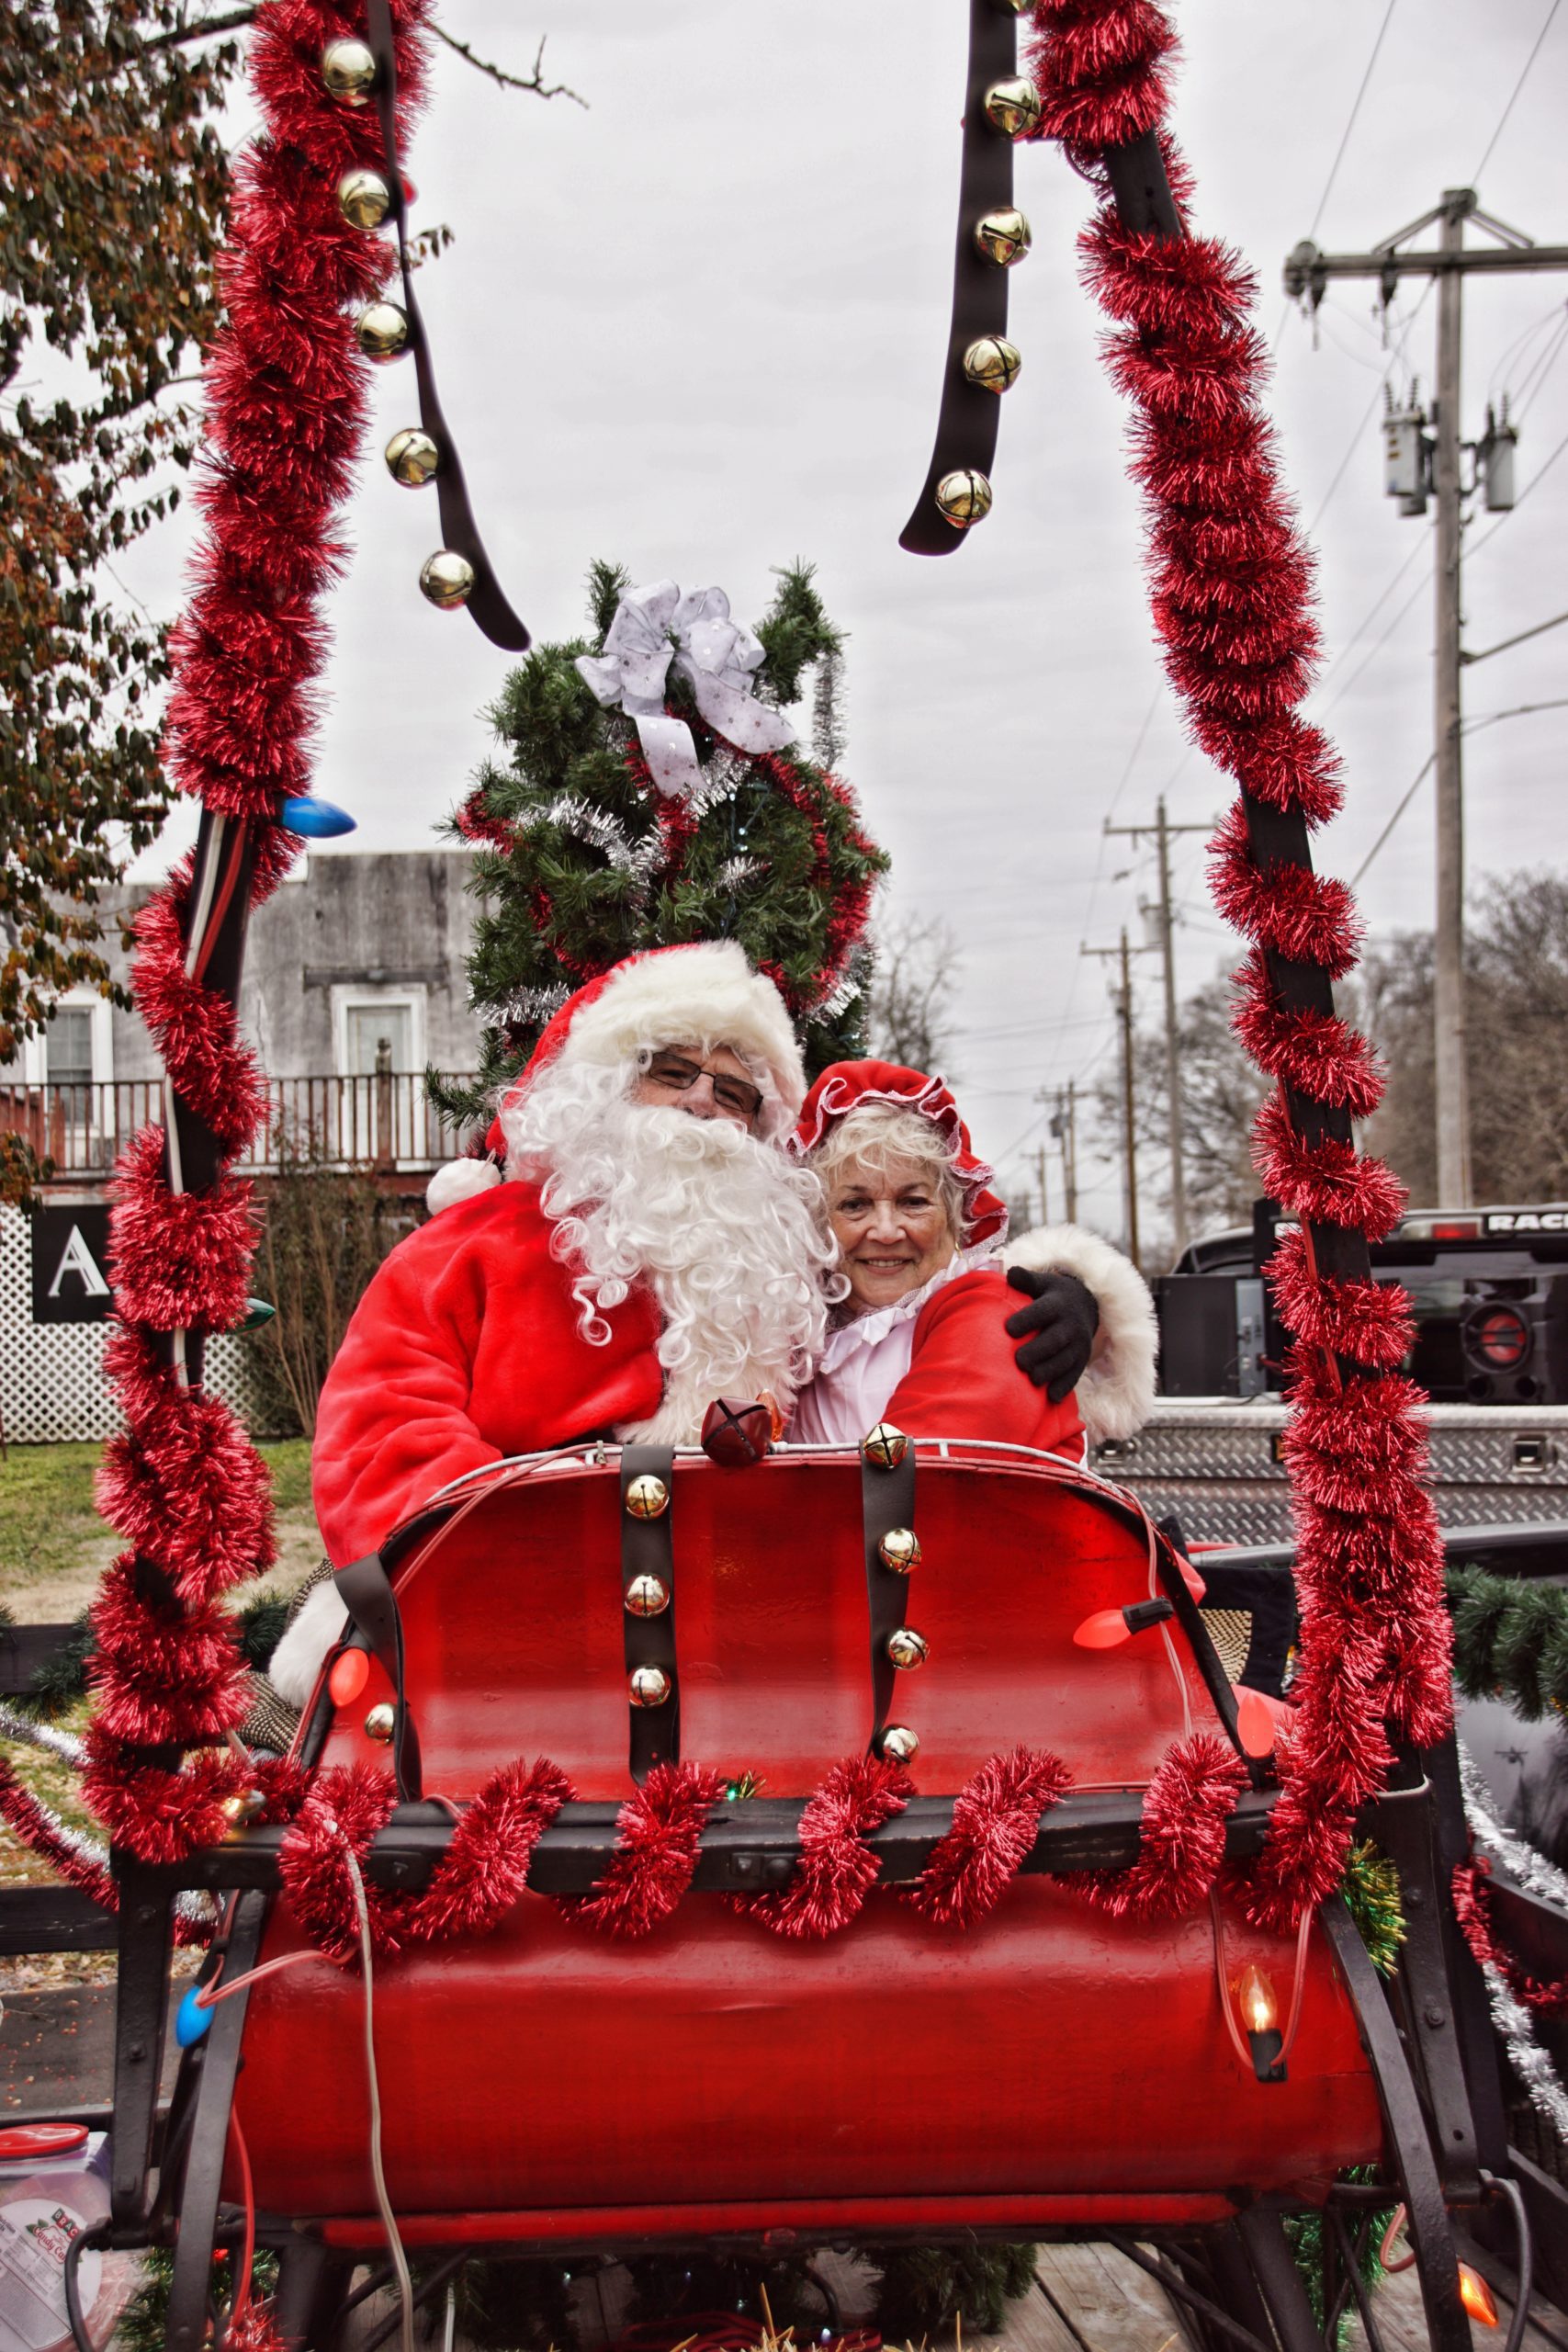 Free sleigh rides with Santa at the Bell Buckle Old Fashioned Christmas